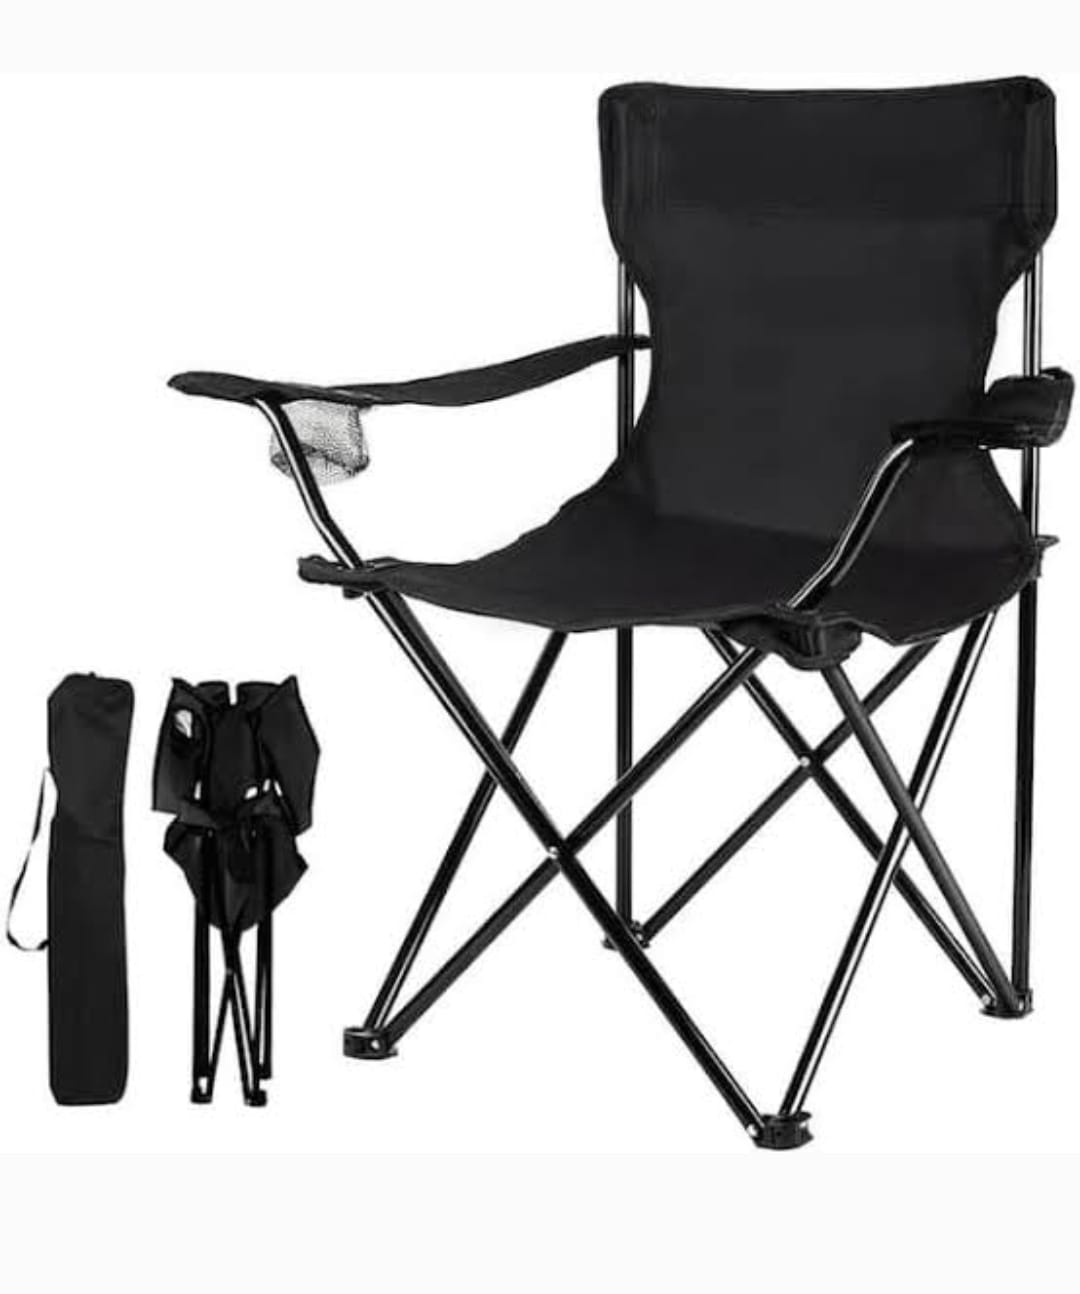 Portable and foldable camping chair